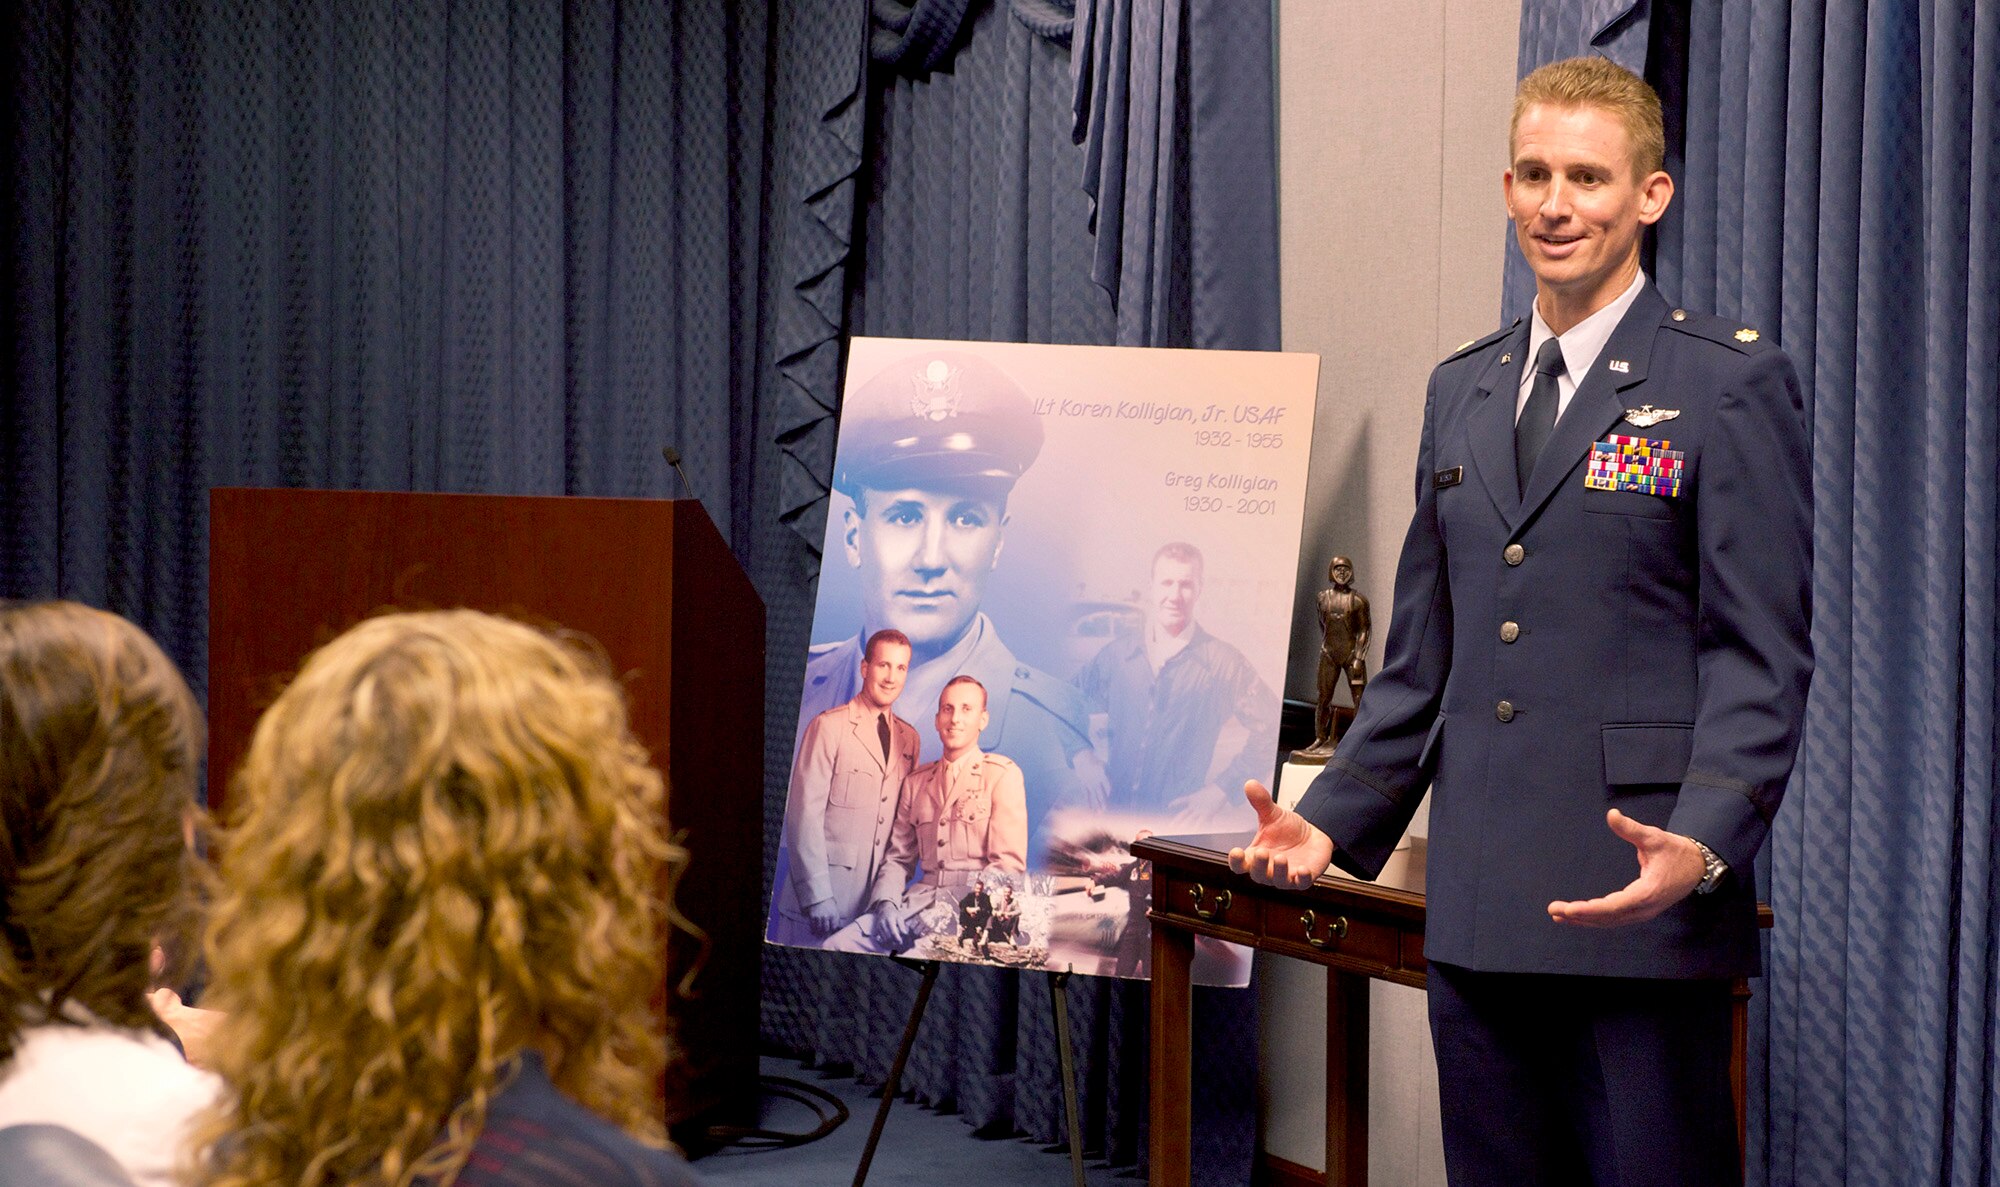 Maj. Jack Nelson is honored during a ceremony at the Pentagon in Washington, D.C., May 25, 2016. Nelson, from the 9th Reconnaissance Wing at Osan Air Base, South Korea, is the recipient of the 2015 Koren Kolligian Jr. Trophy for outstanding airmanship by an aircrew member who, by using extraordinary skills, averted or minimized the seriousness of an aircraft accident. (U.S. Air Force photo/Andy Morataya)